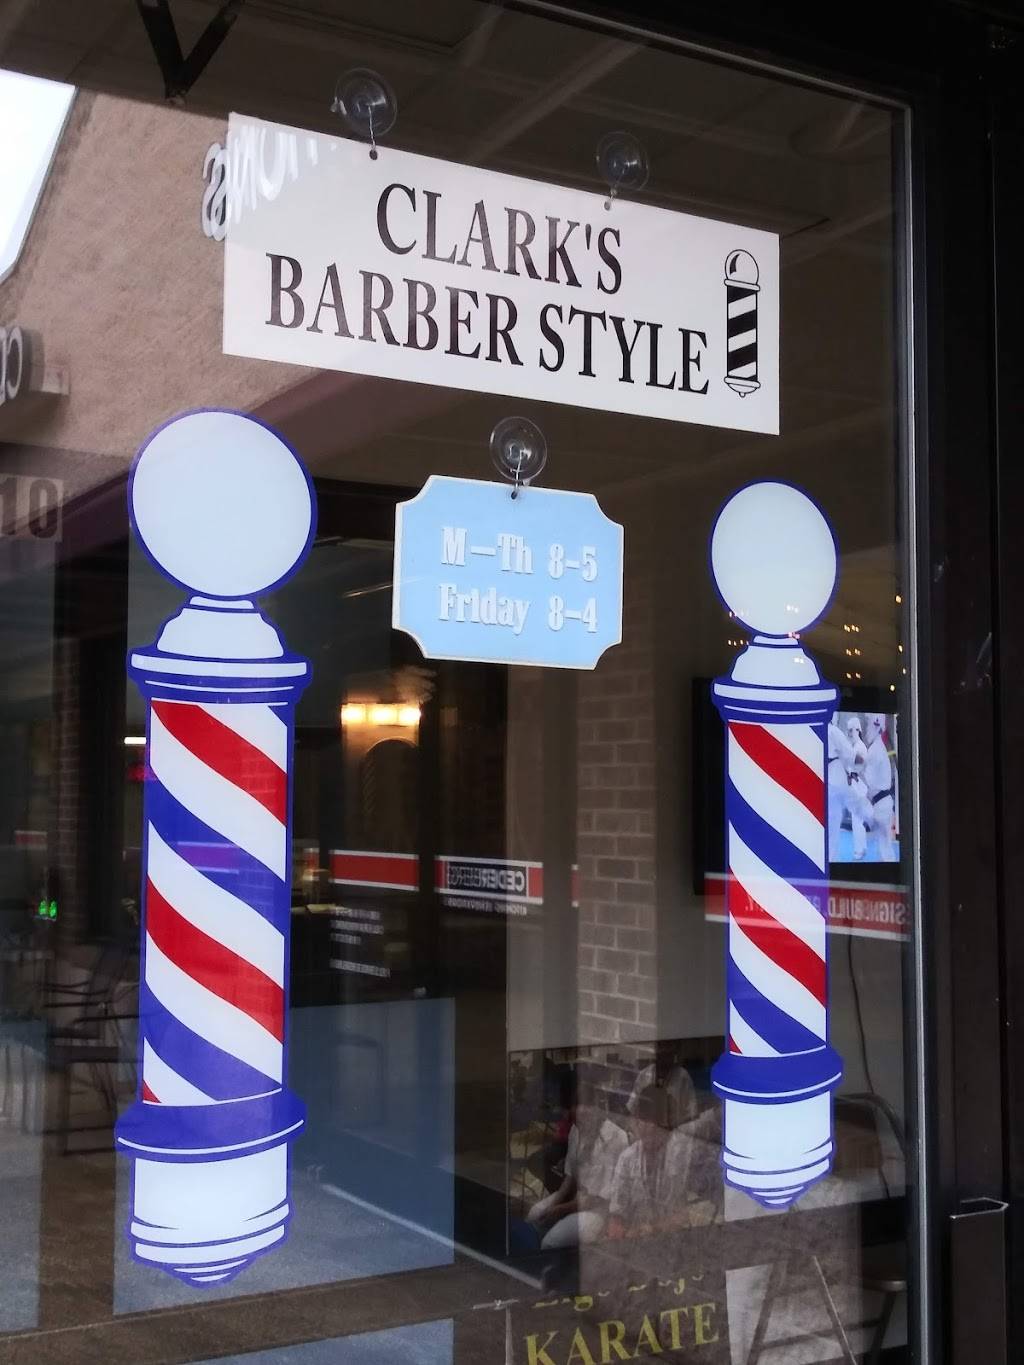 Clark’s Barber Style | 630 Weaver Dairy Rd, Chapel Hill, NC 27517, USA | Phone: (919) 942-8770